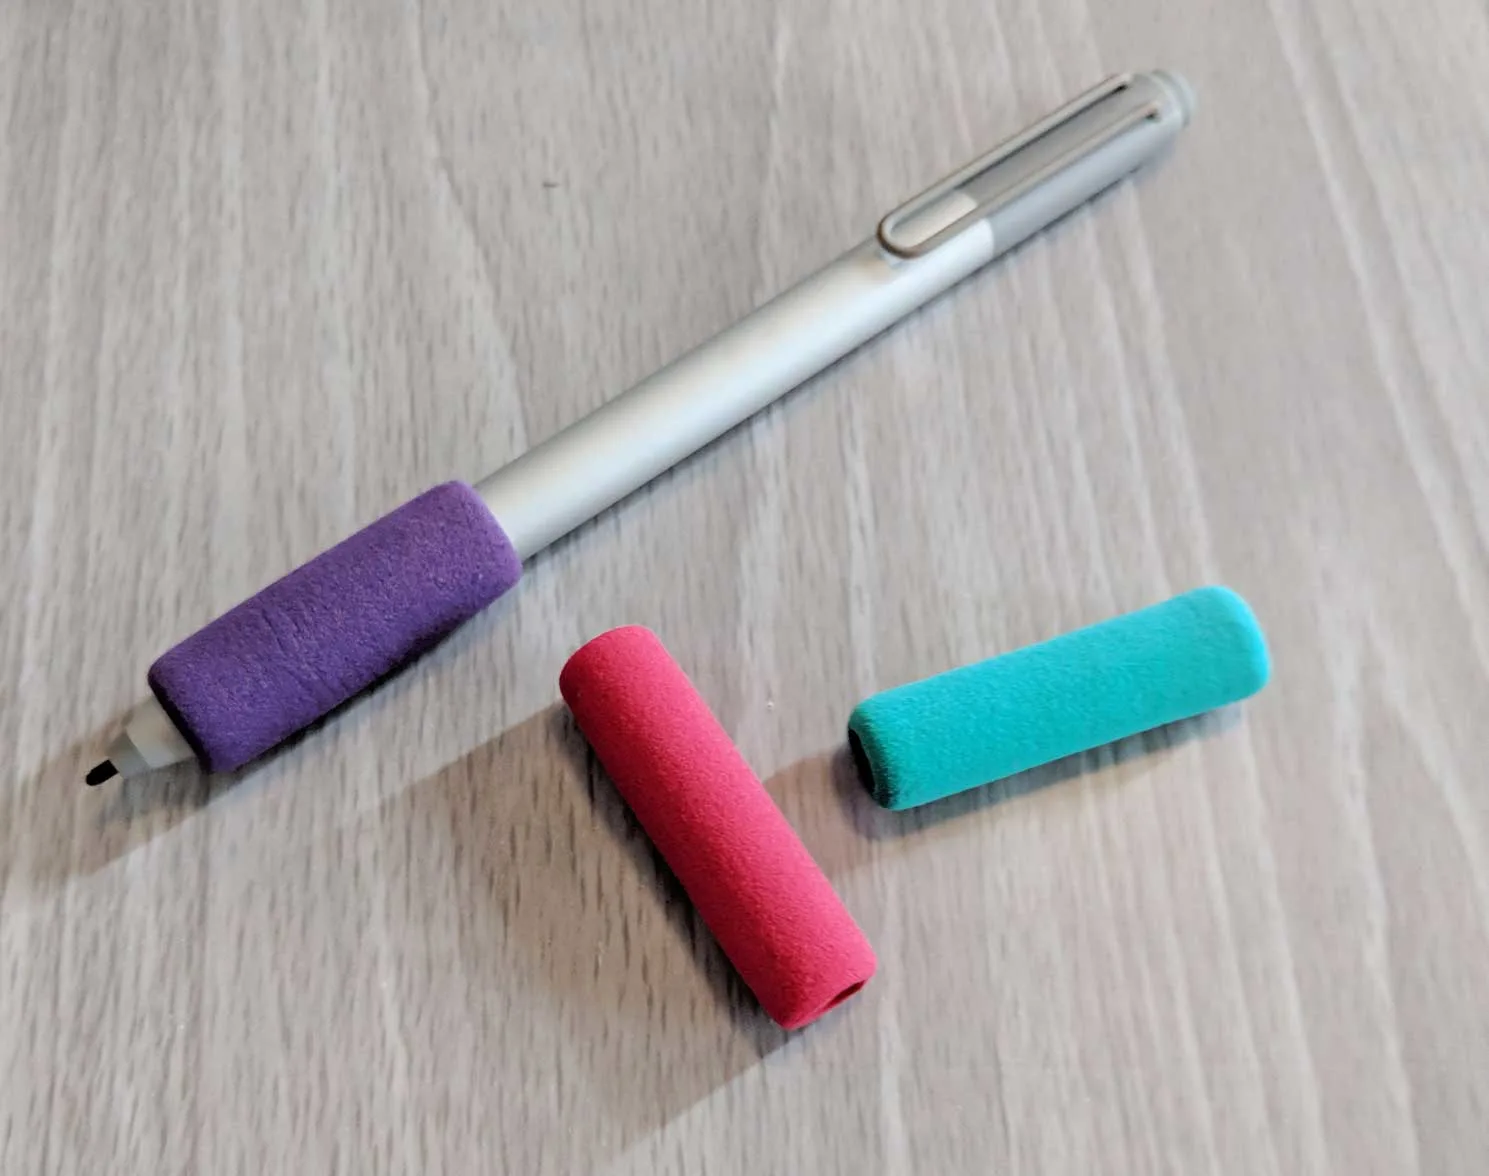 90's style cushy pen grips improve the grip-ability of the pen, making it easier to draw for long periods without fatigue.